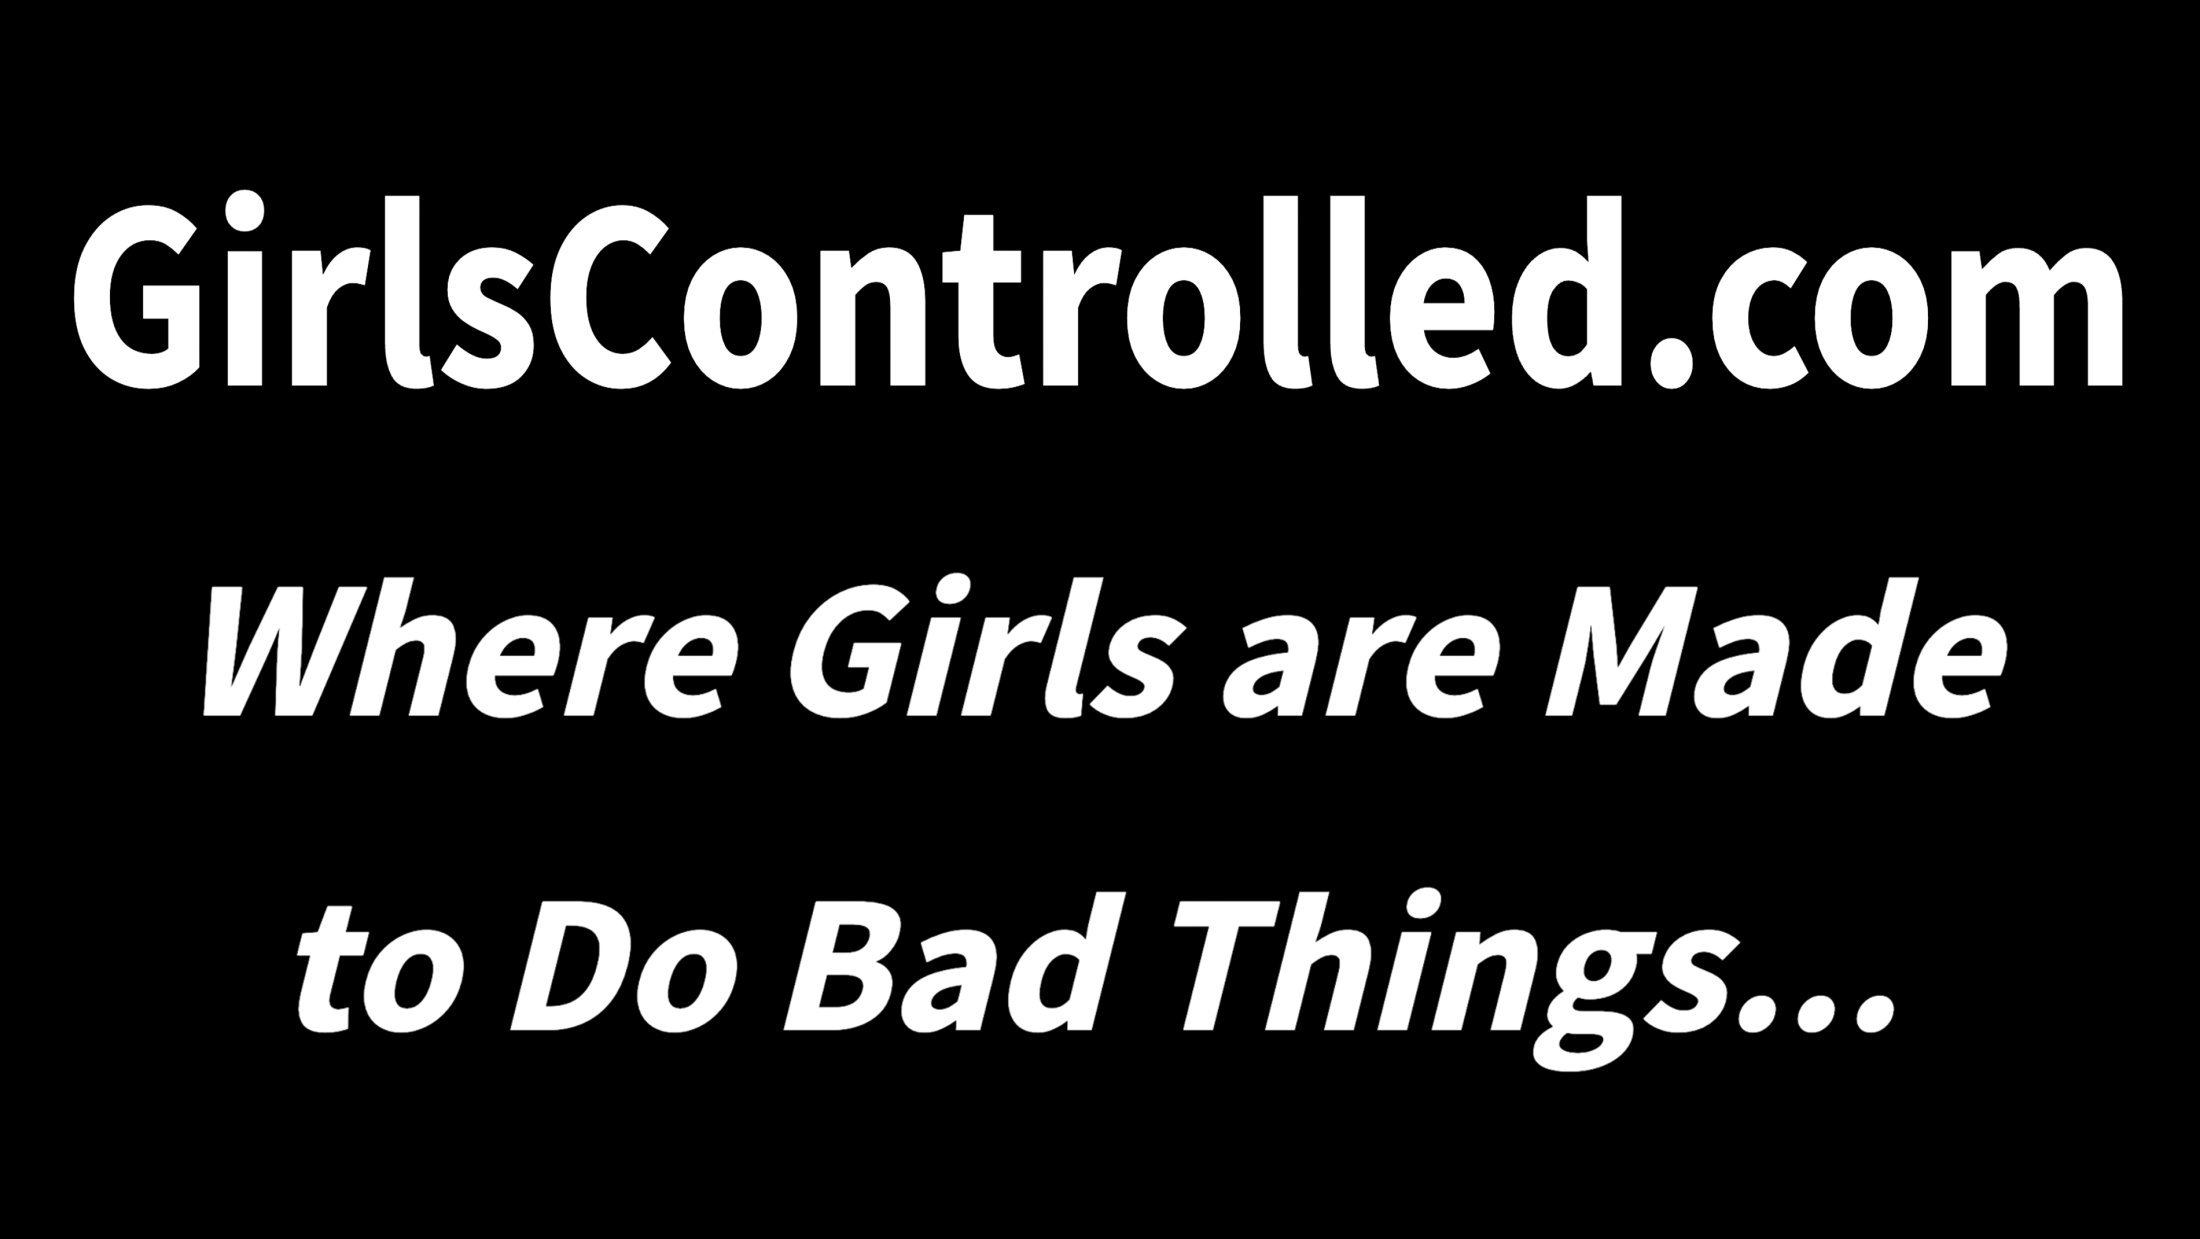 Girls Controlled